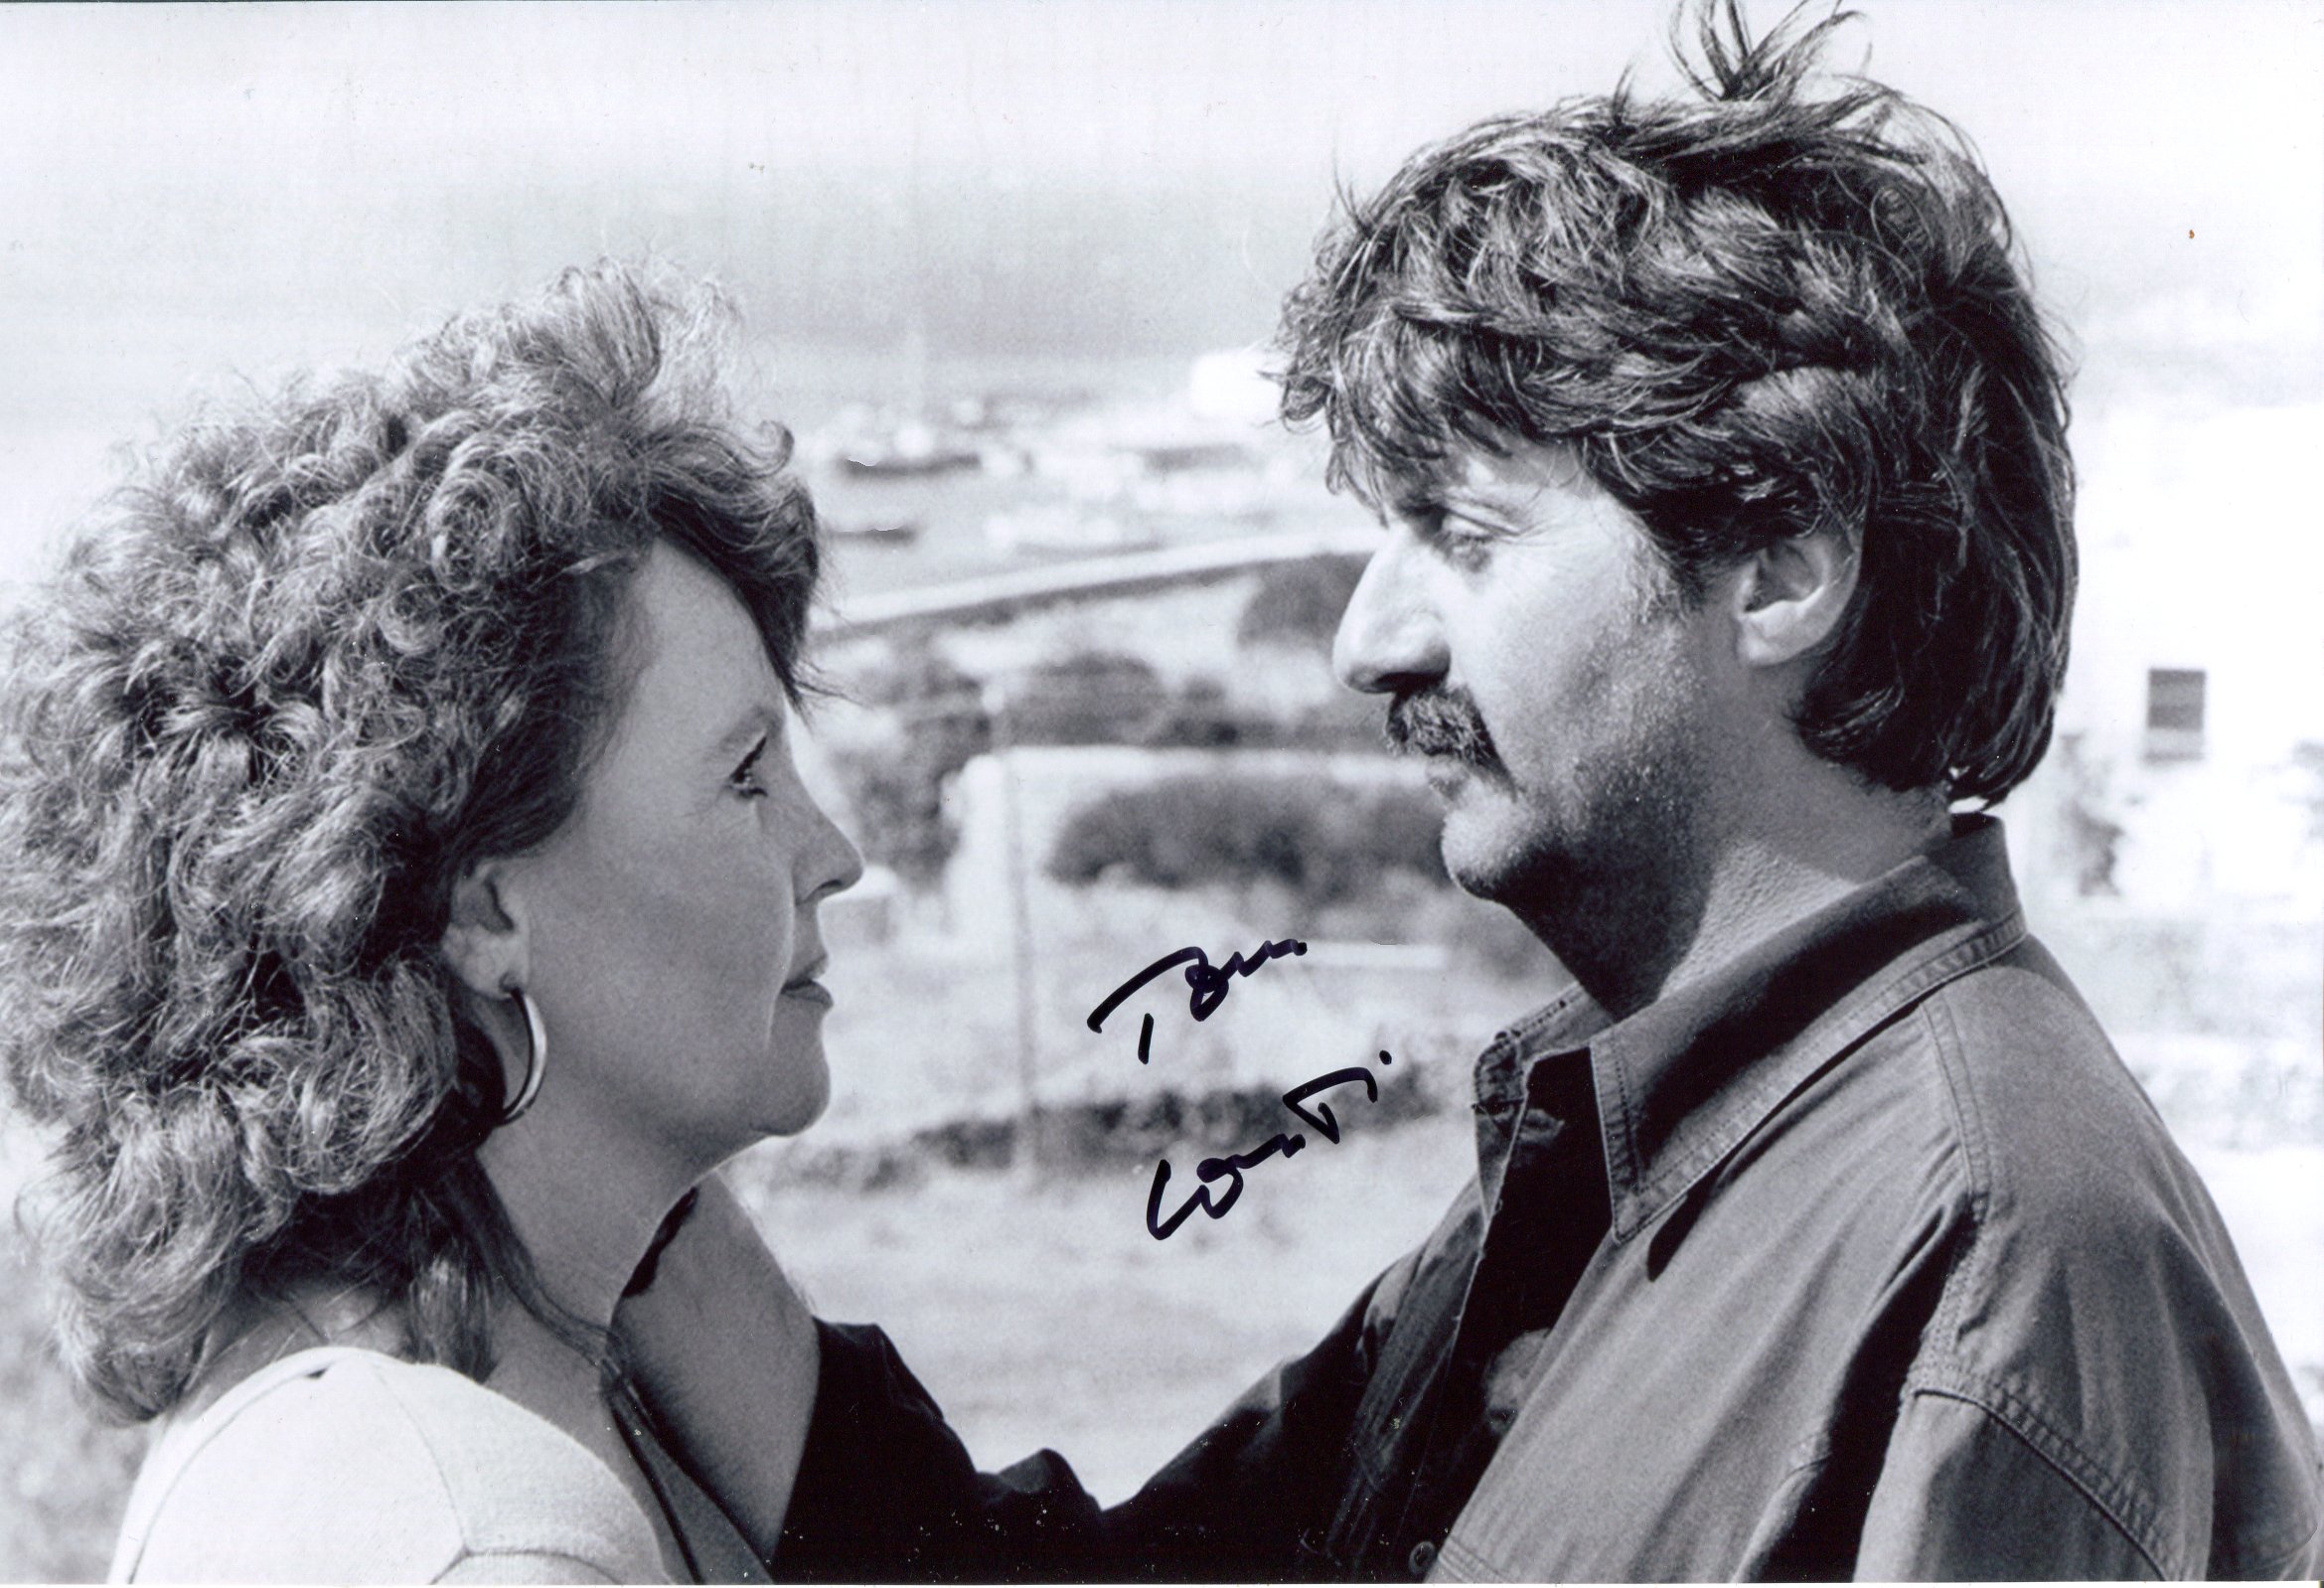 Shirley Valentine 8x12 movie scene photo signed by actor Tom Conti. Good condition. All autographs